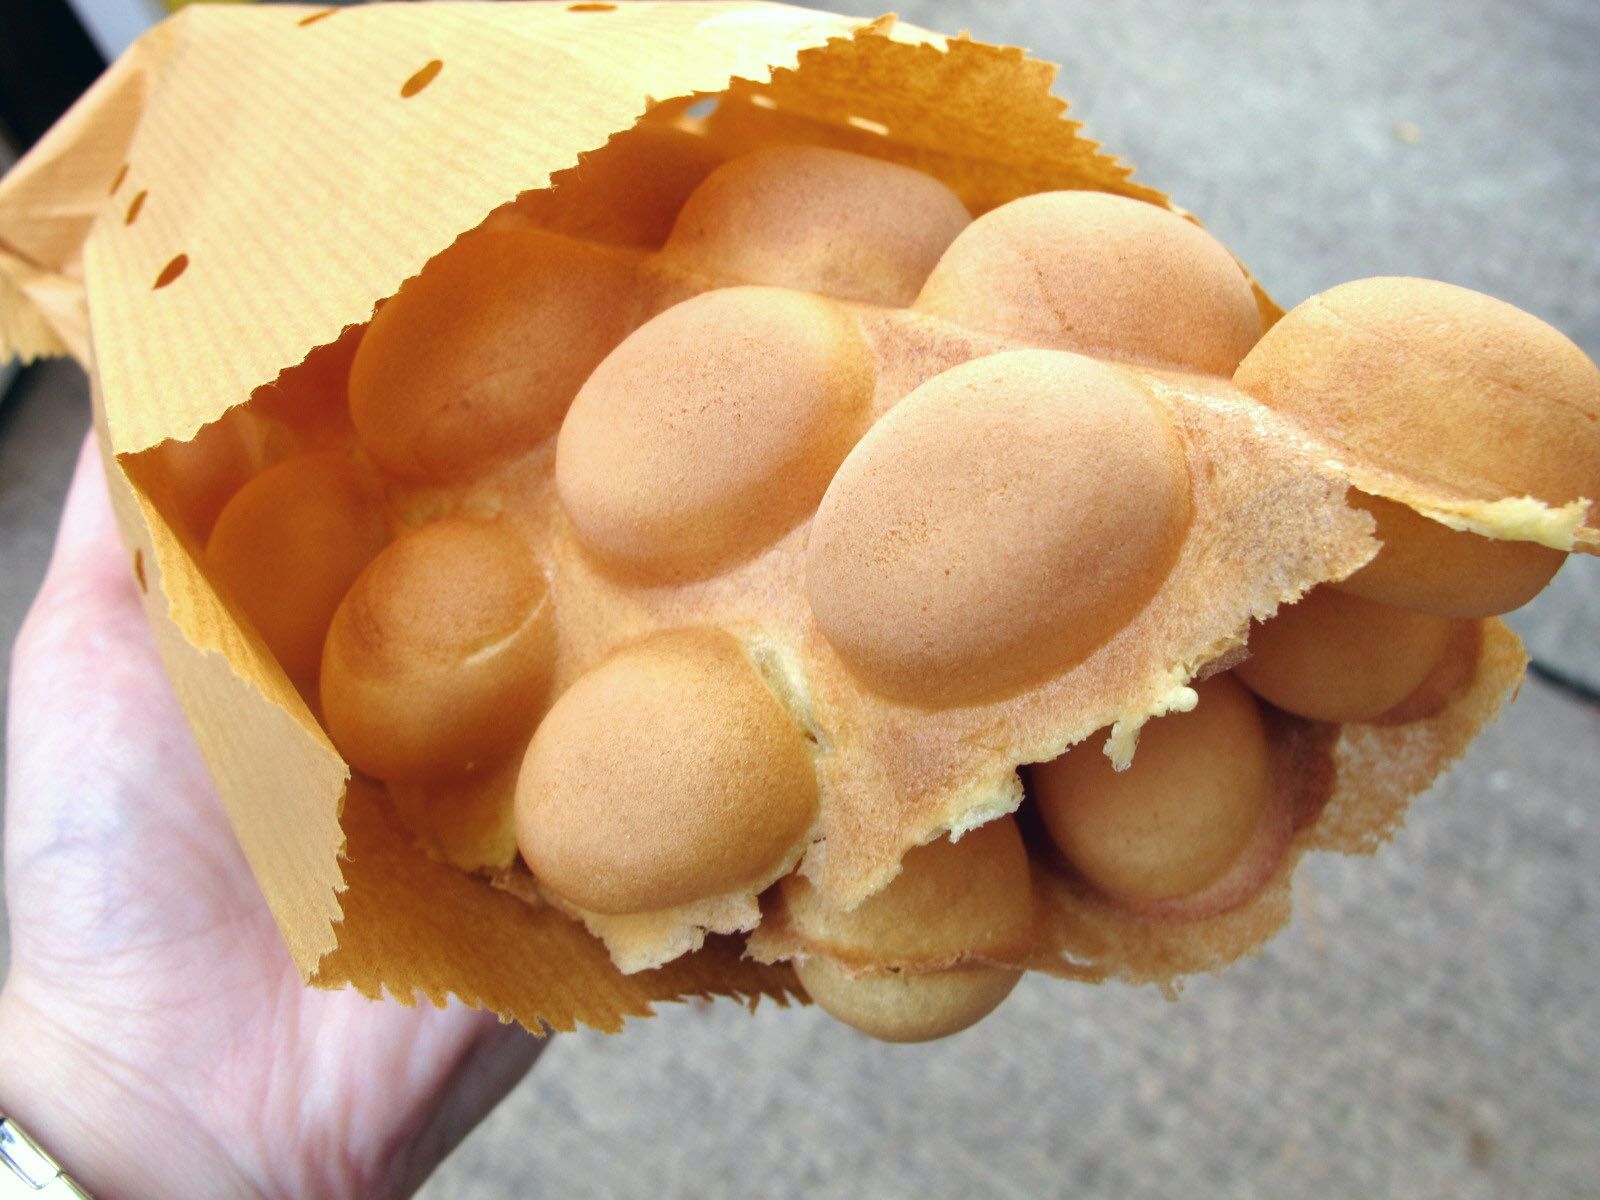 🌭 Here Are 24 Street Foods Around the World – Can You Match Them to Their Continent? Hong Kong Bubble Waffle